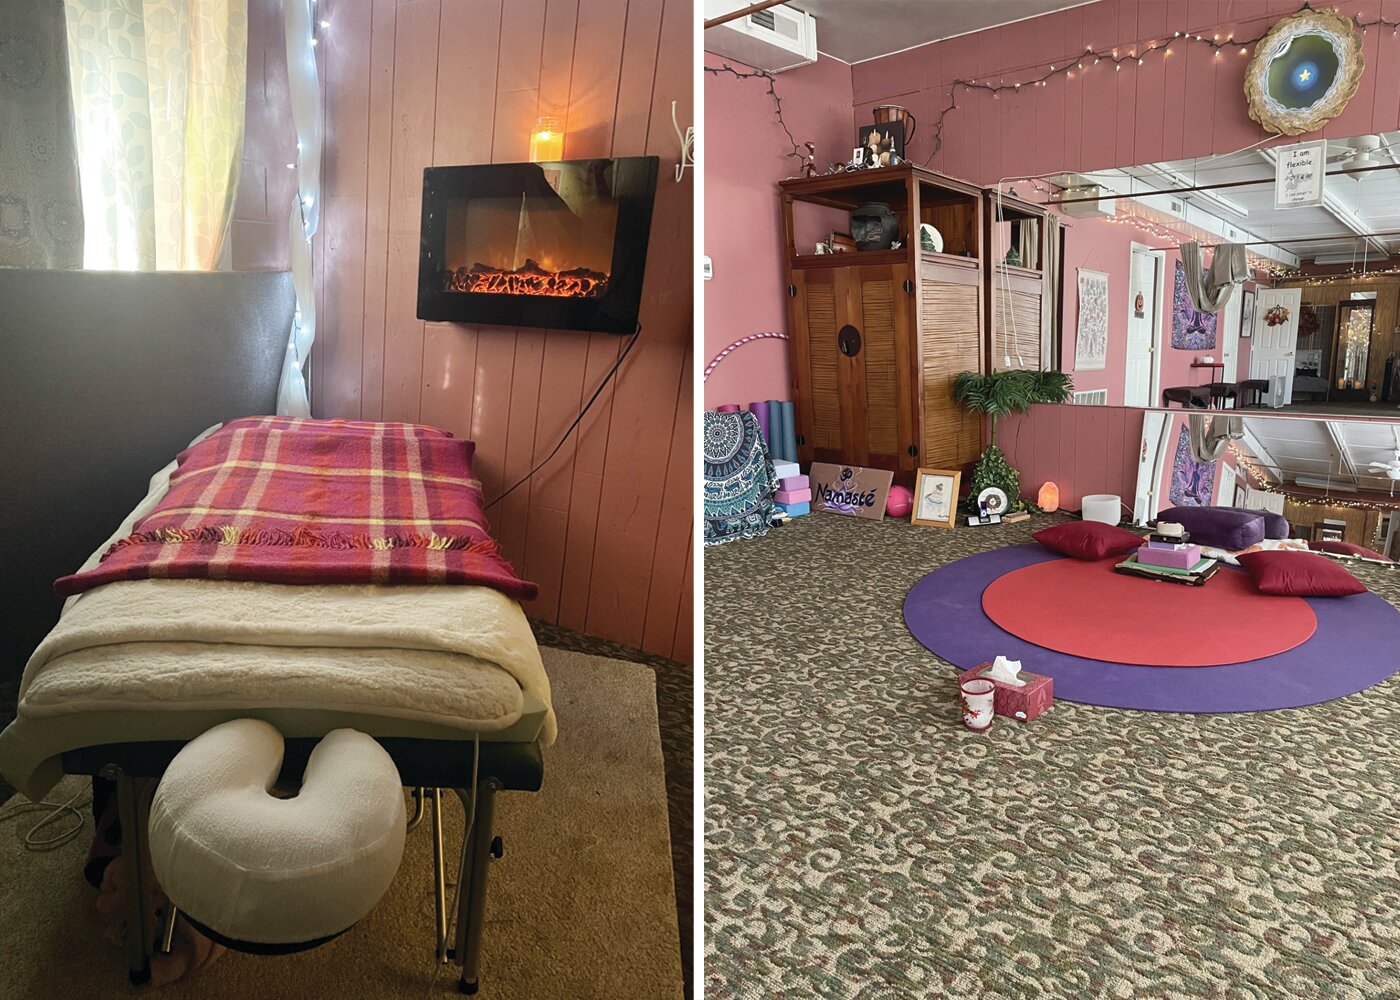 Shown here are the serene massage therapy room and calming yoga room of West Shore Wellness center on Sandy Lane in Warwick.  Visit them today at www.WestShoreWellness.com to learn more.